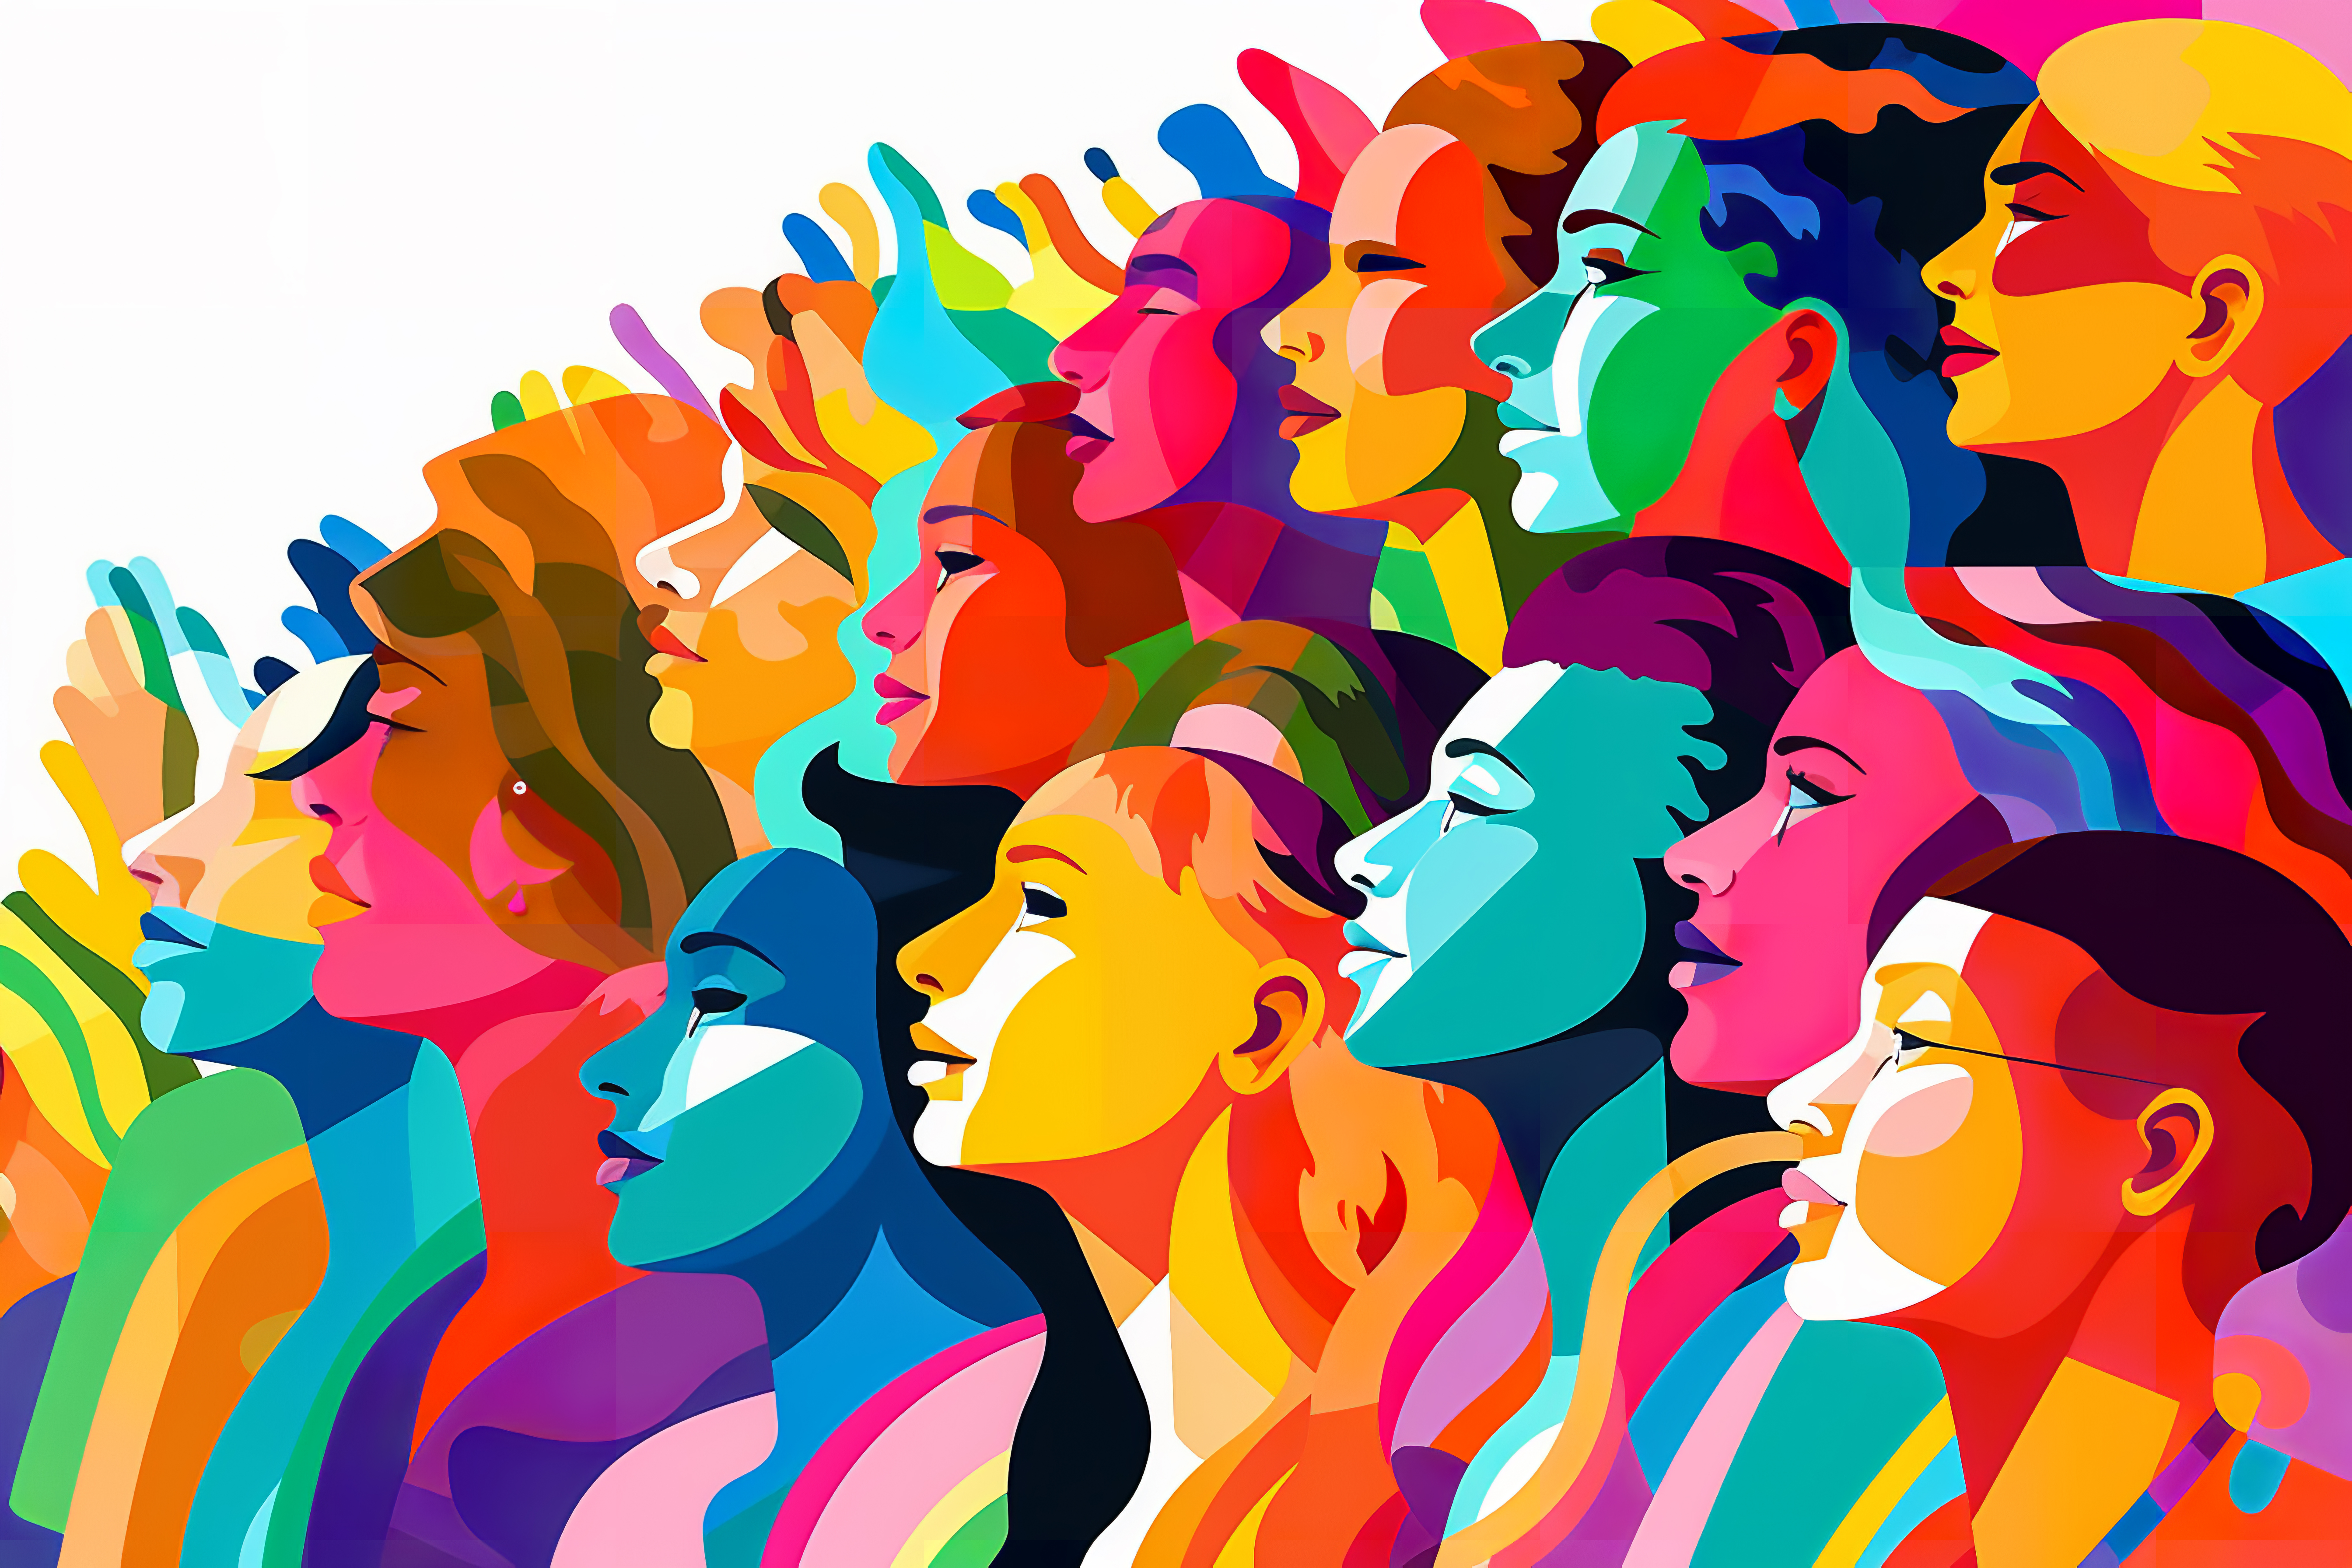 Pop art illustration of a diverse range of people from, and in support of, the LGBTQ+ community.